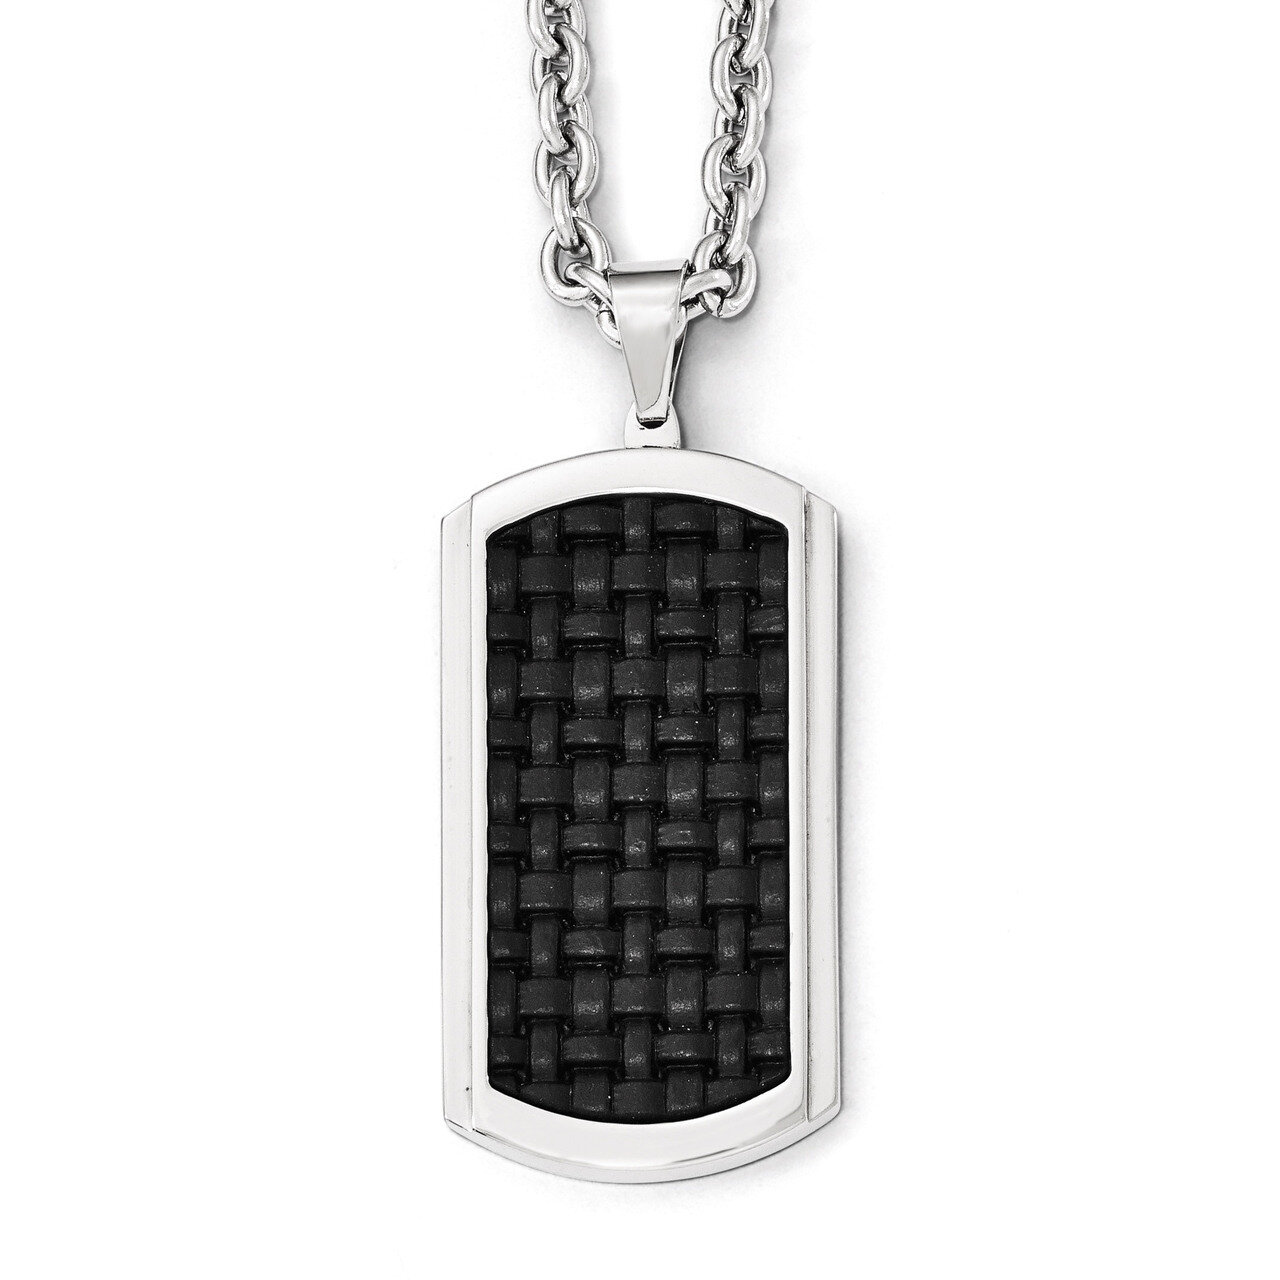 Polished Leather Inlay Dog Tag Necklace - Stainless Steel SRN1984-24